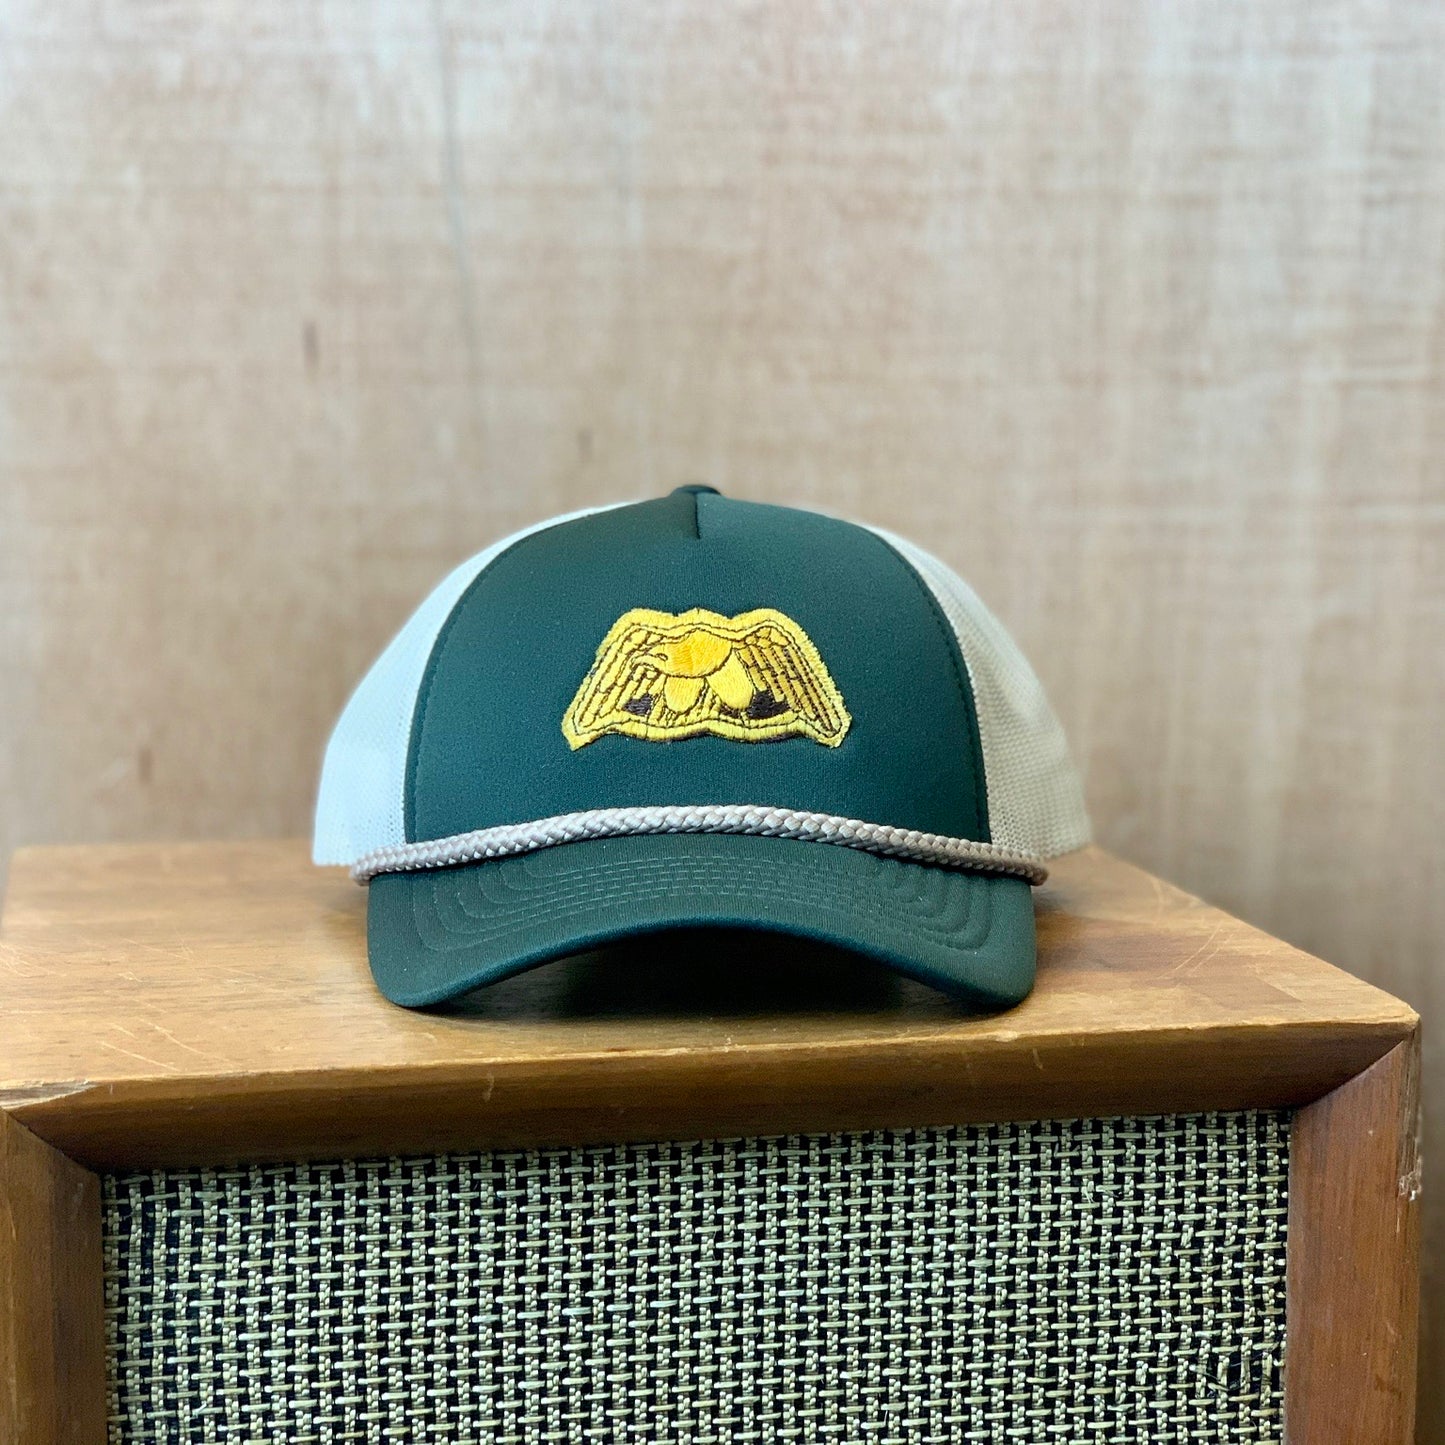 Vintage Military Patch Trucker